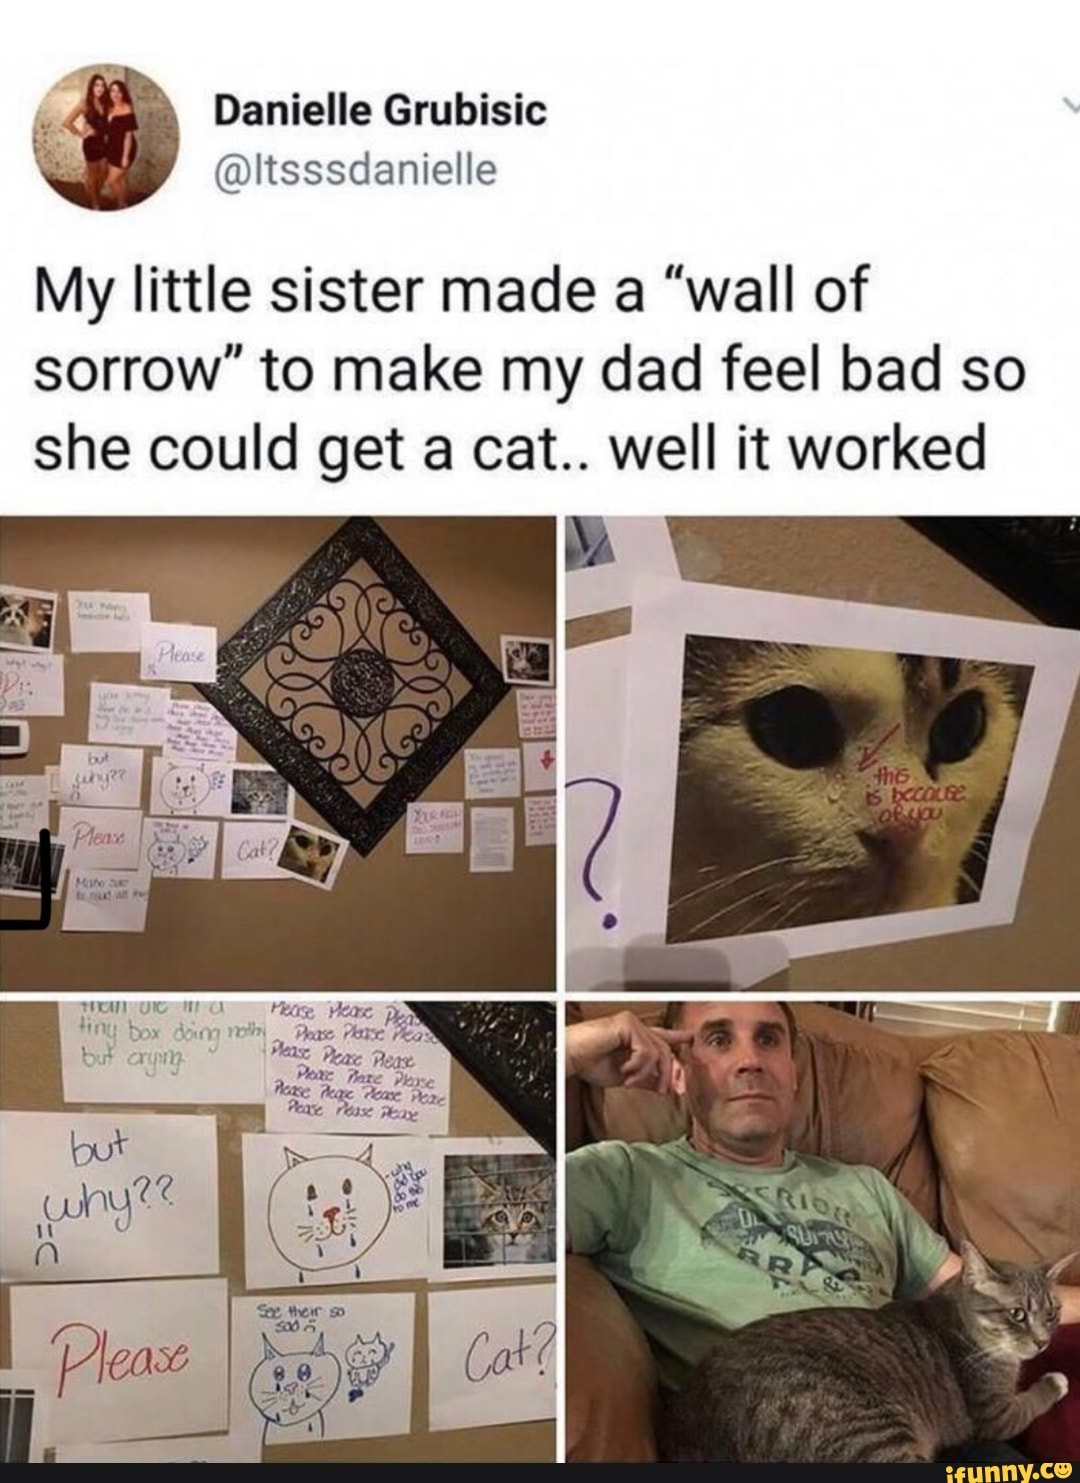 wall of sorrow to get a cat - Danielle Grubisic My little sister made a "wall of sorrow to make my dad feel bad so she could get a cat.. well it worked Oy Cas Please the Bb Cache Orku Pleas Tuturo Precise Please pre fint box doing nothi. Dease Planse Peas